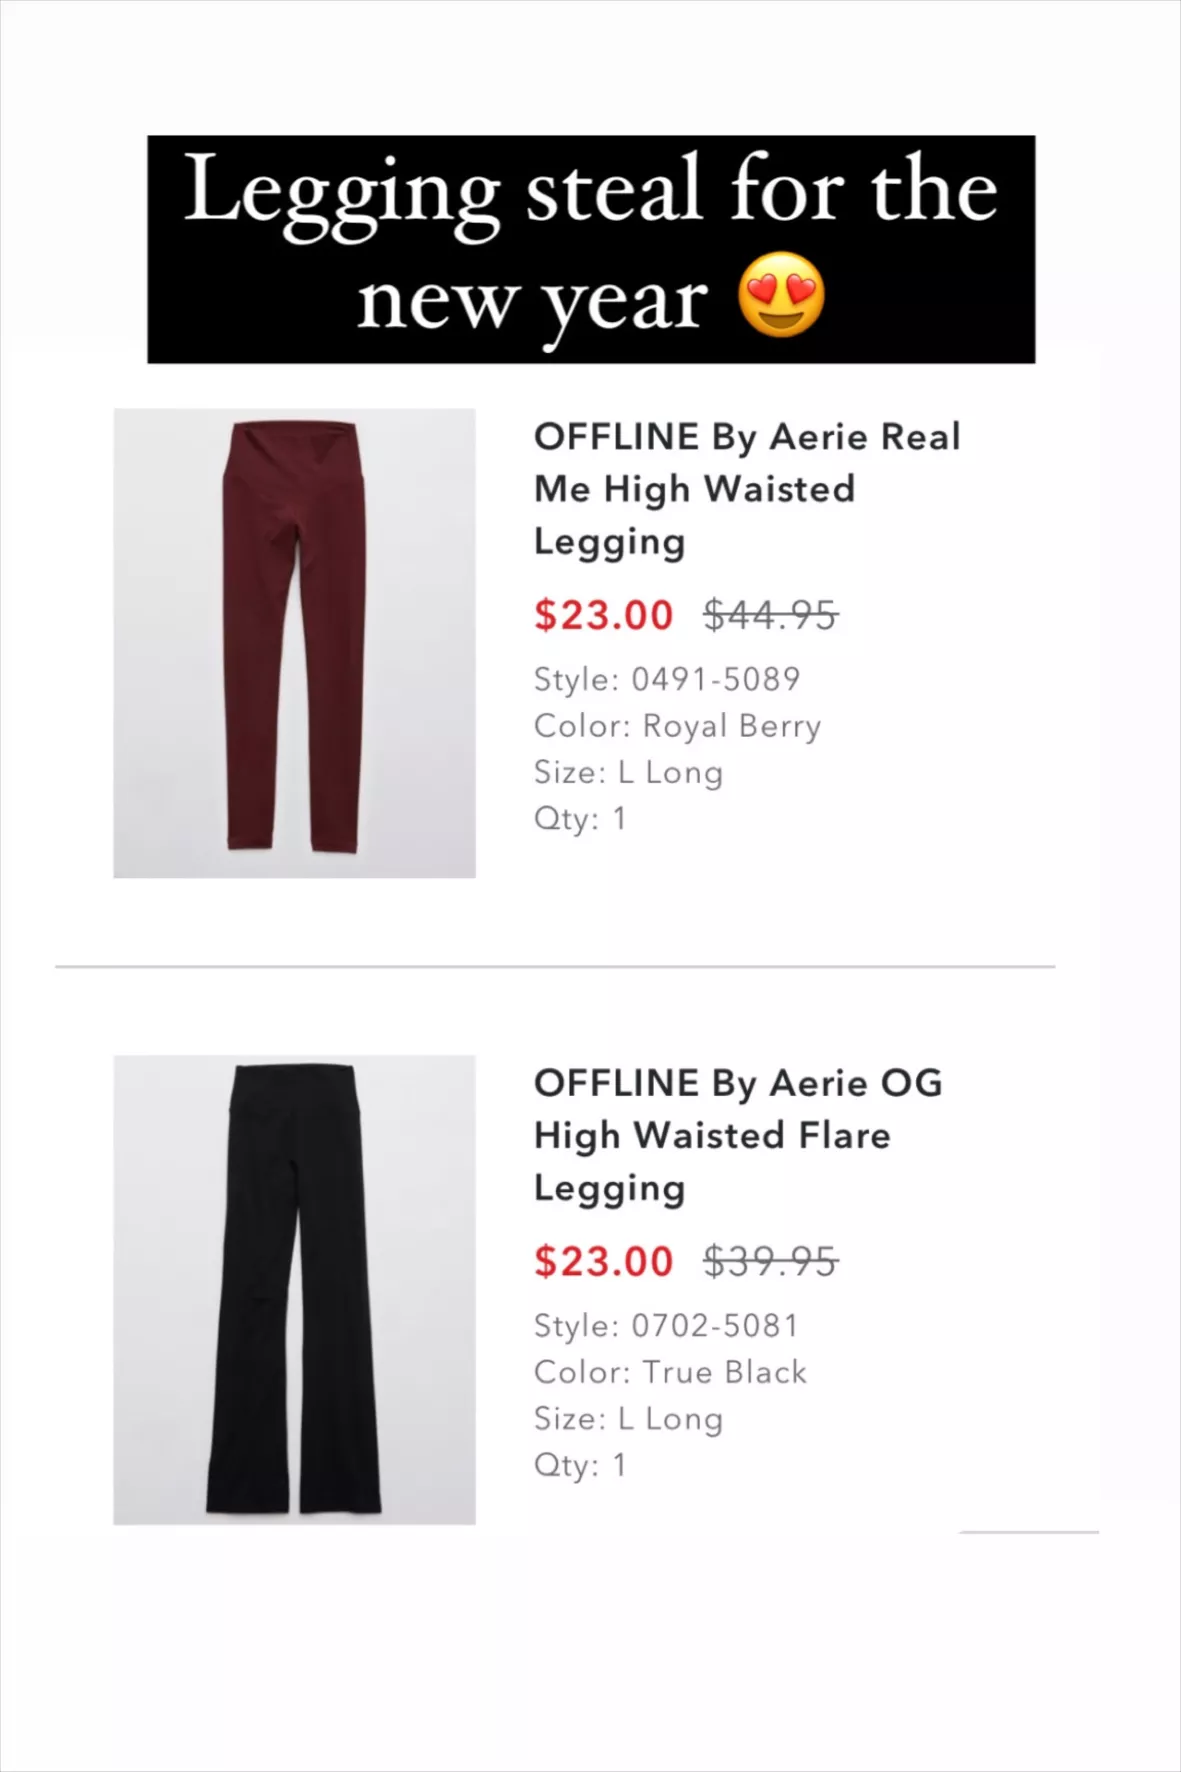 Shop OFFLINE By Aerie Real Me High Waisted Crossover Super Flare